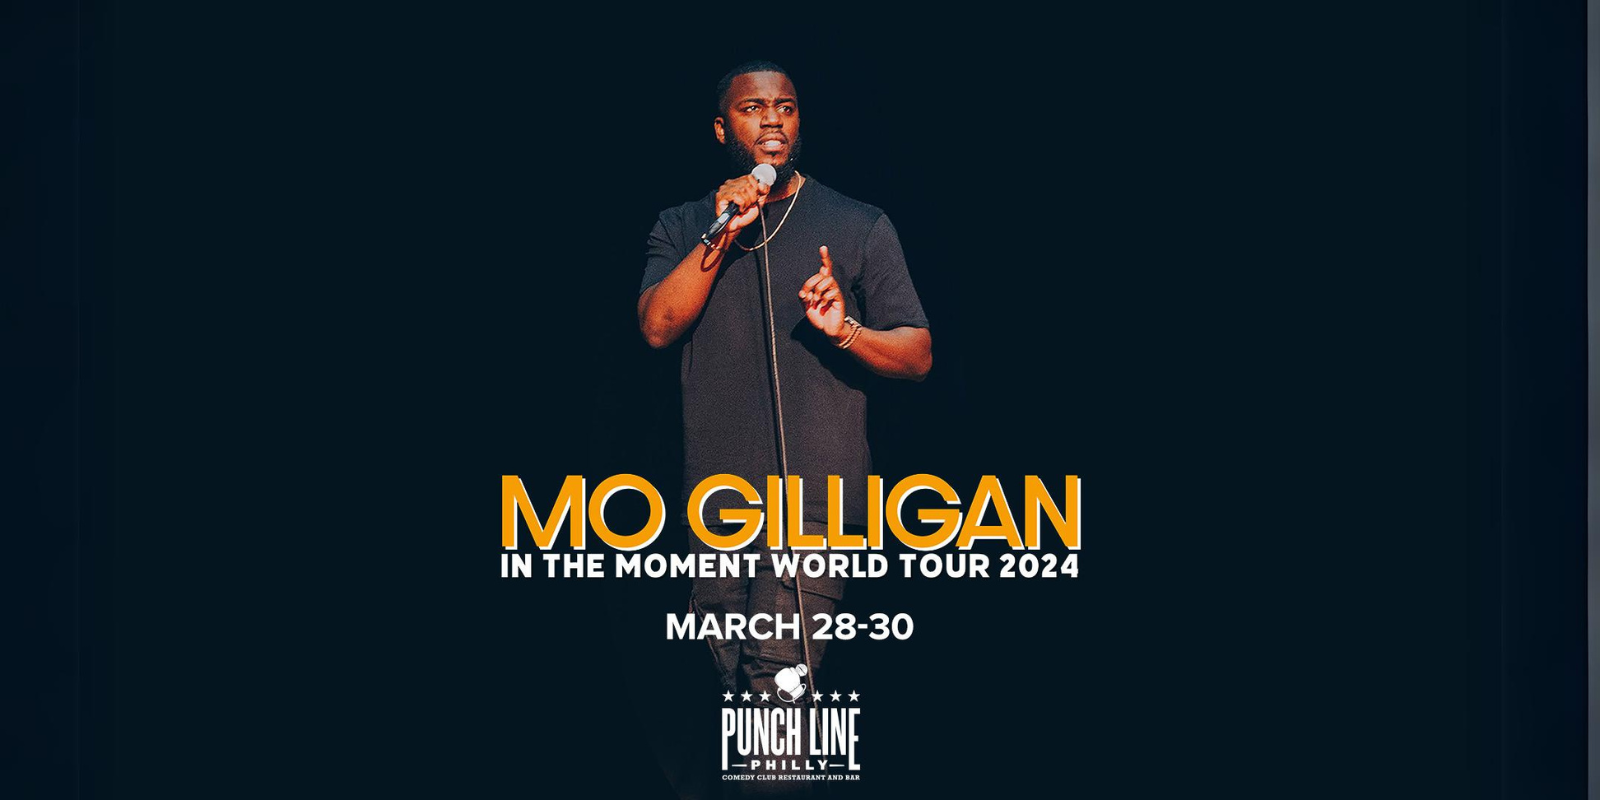 Mo Gilligan: In The Moment World Tour 2024